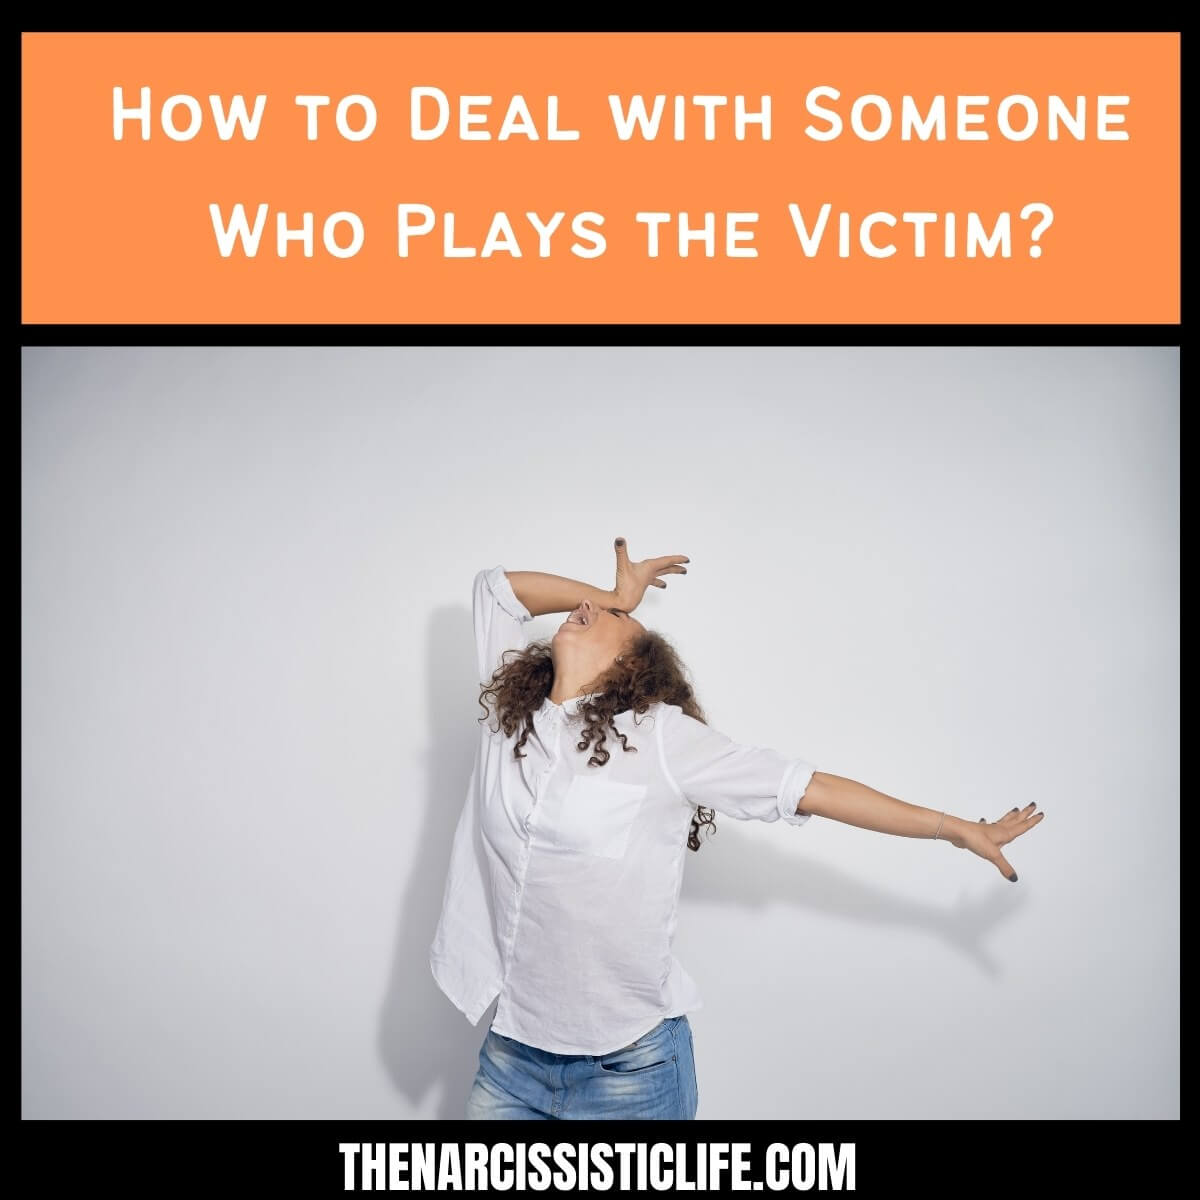 How to Deal with Someone Who Plays the Victim